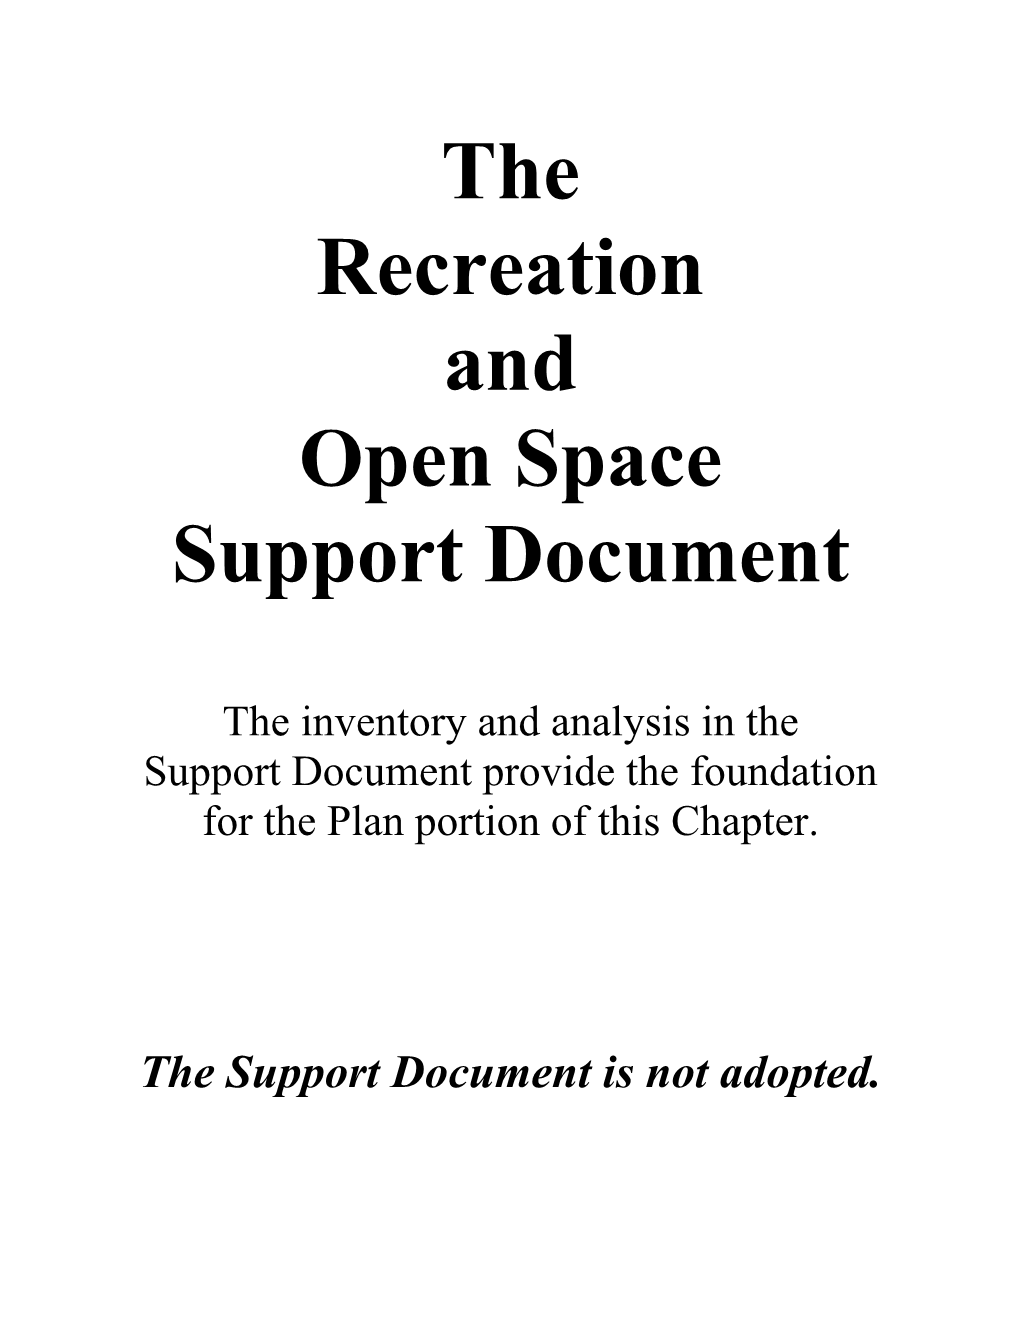 The Recreation and Open Space Support Document